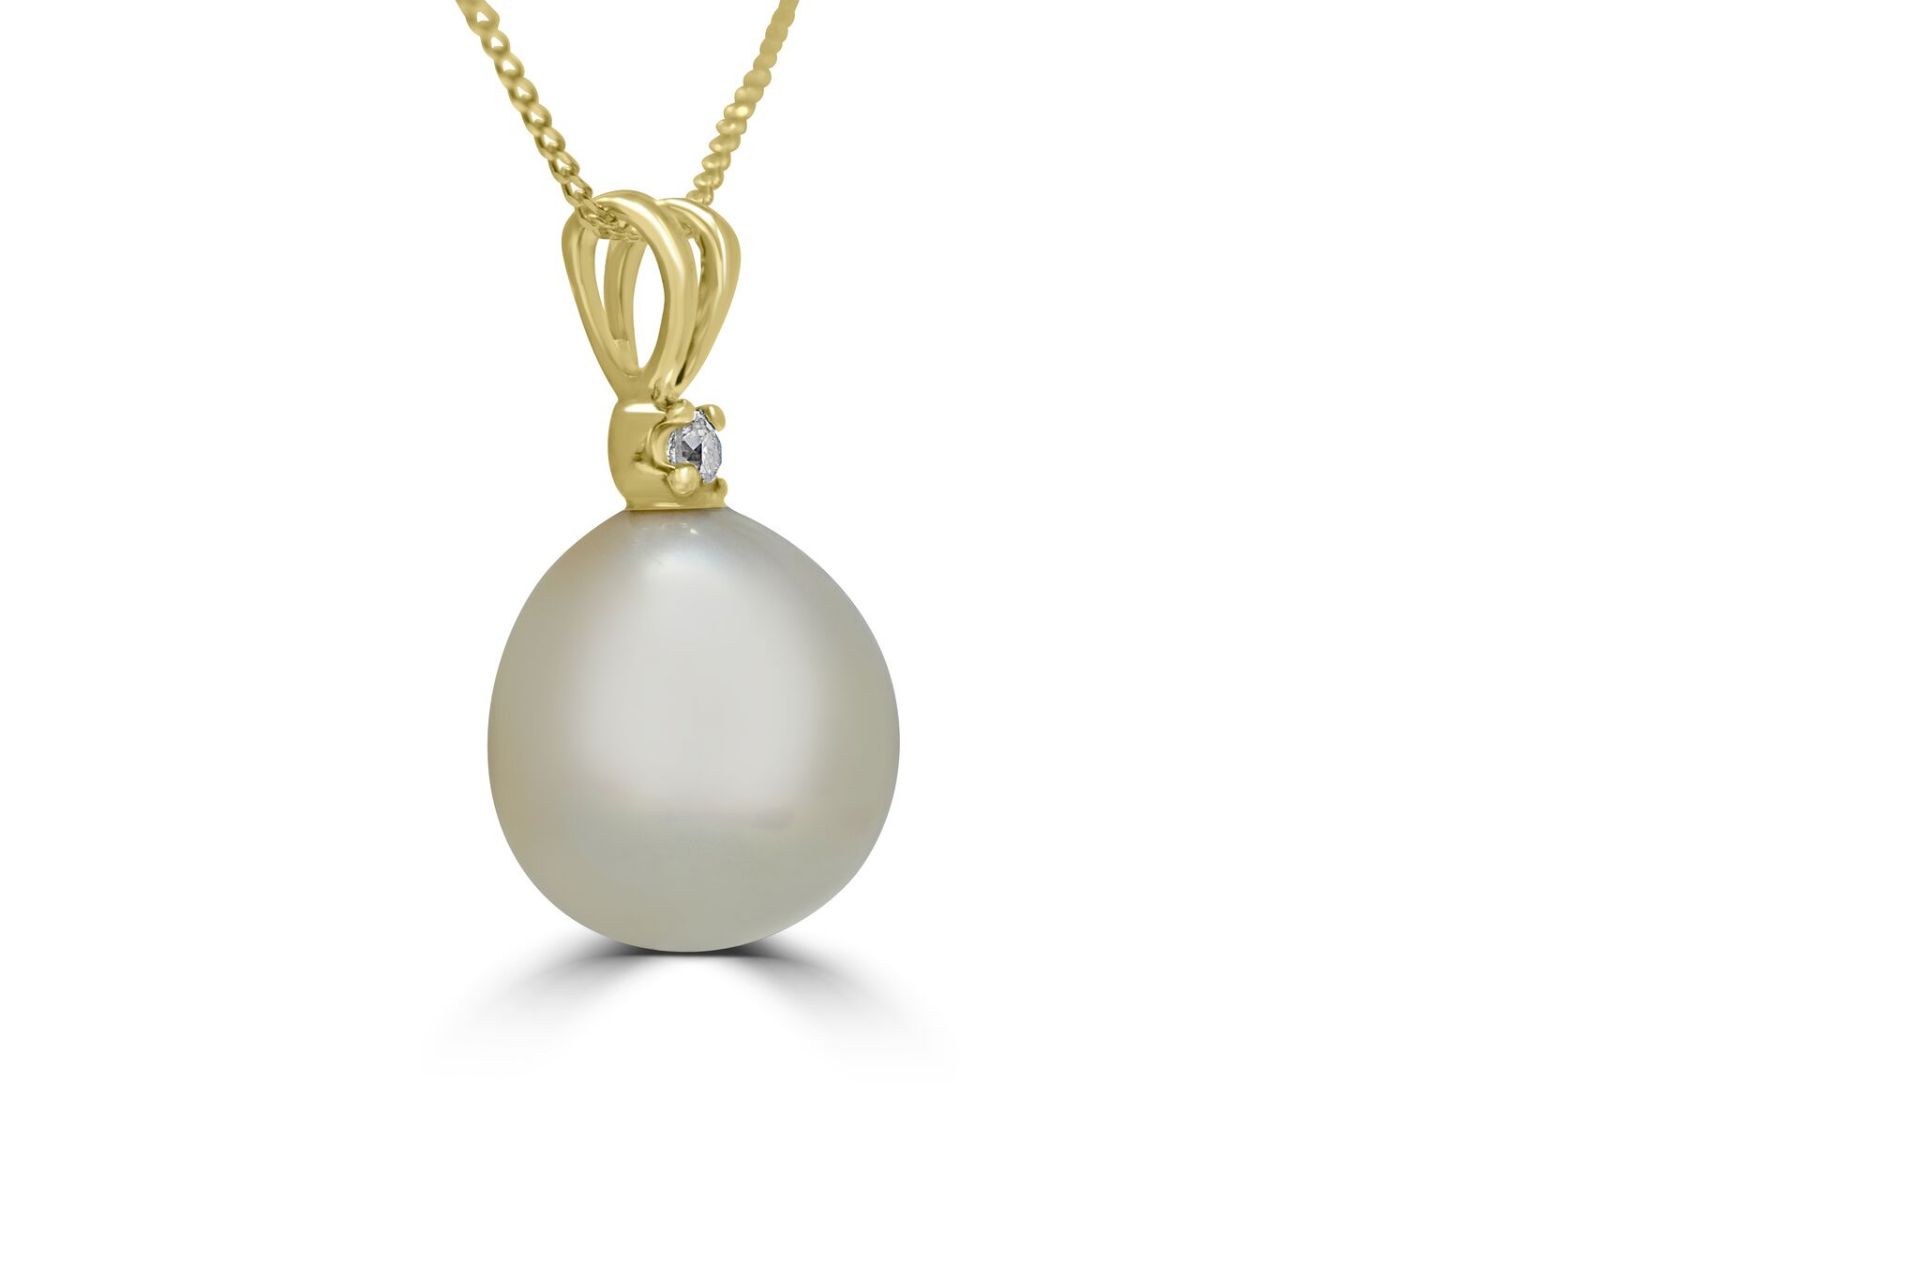 Pearl and Diamond Pendant with yellow gold chain - Image 3 of 3